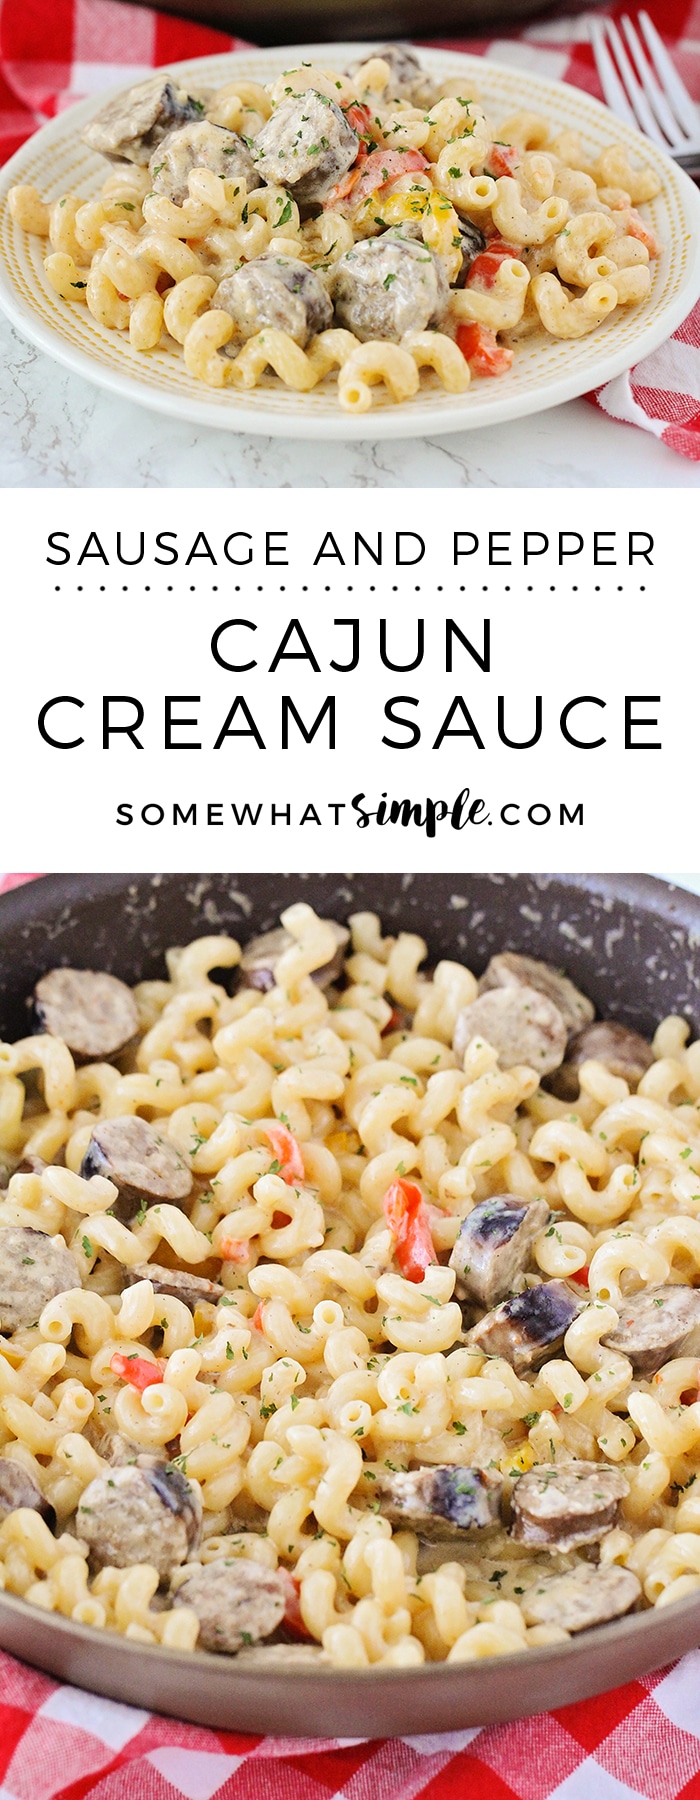 This rich and creamy Cajun Cream Sauce Pasta is quick and easy to prepare. Loaded with sausage and pepper this recipe is FULL of flavor! via @somewhatsimple